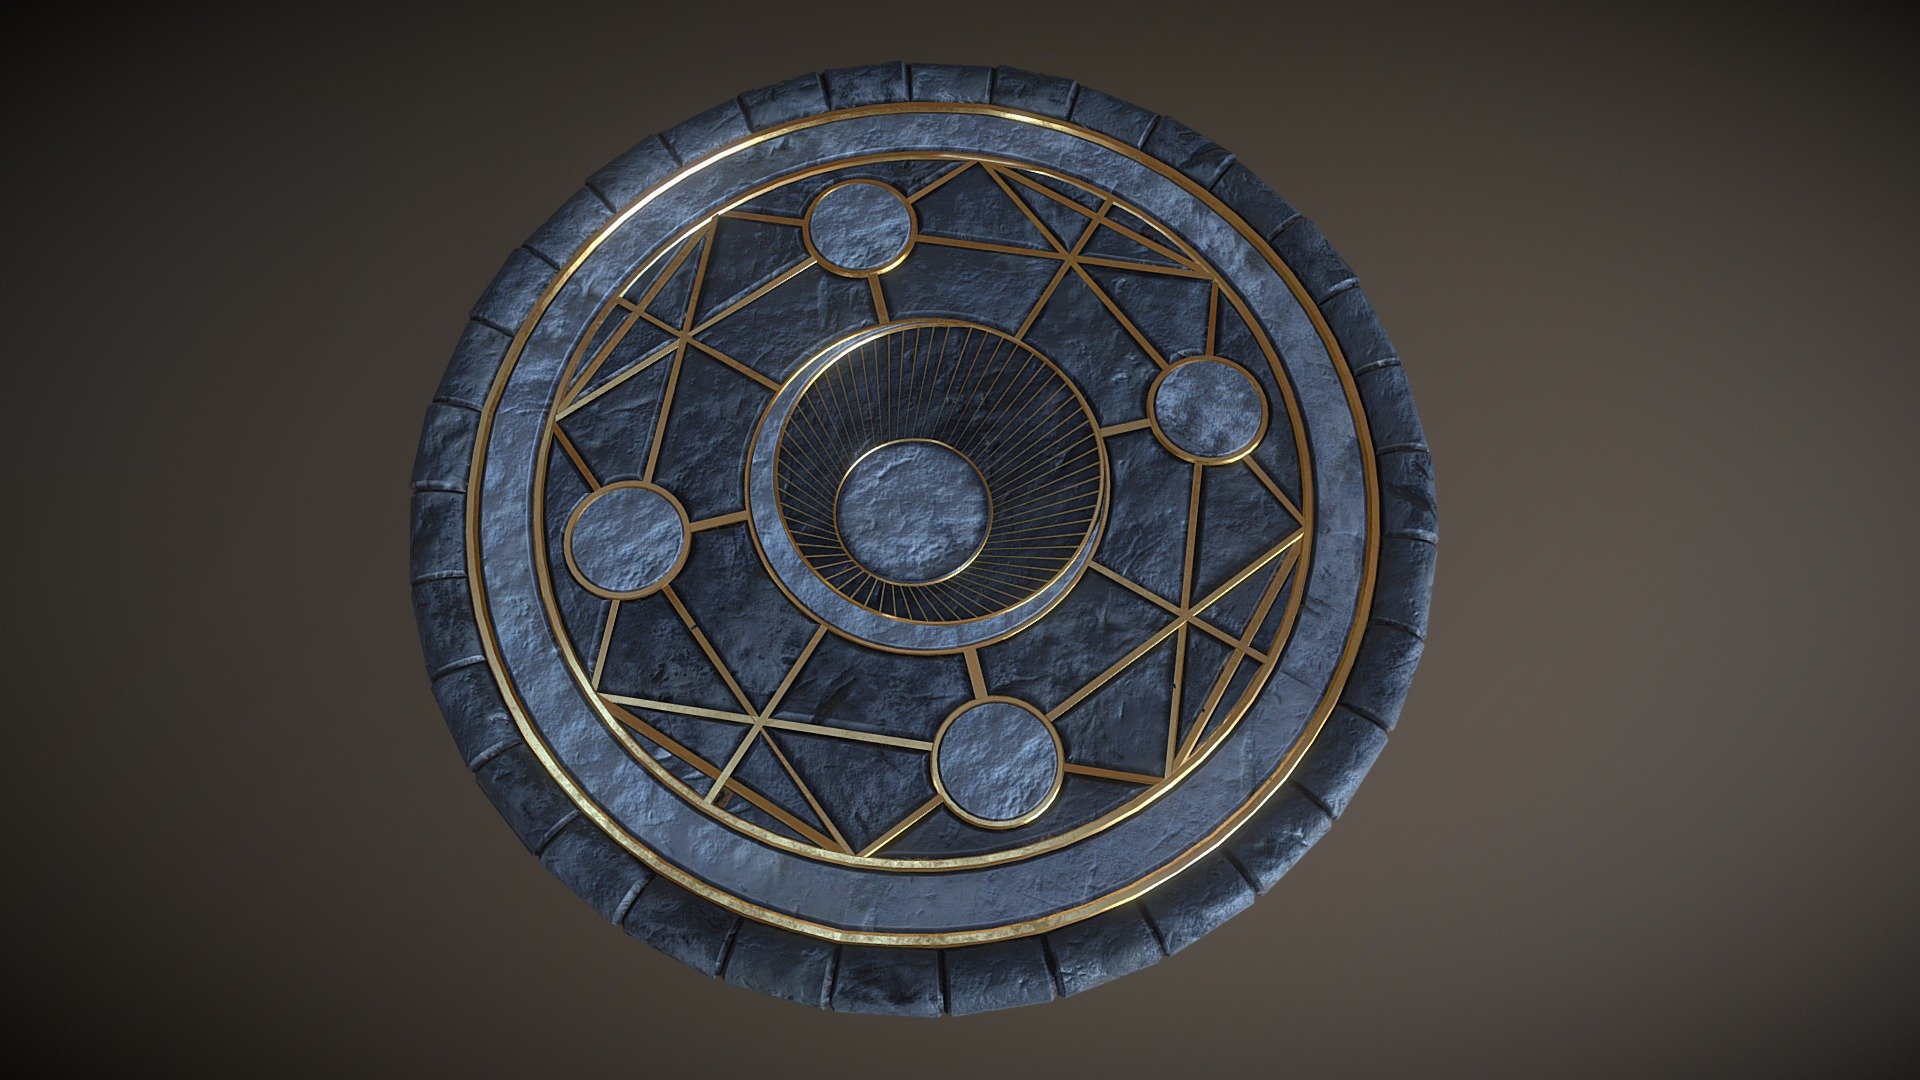 This project is for the Academy of Art University's Game Environment Production course. In this course, I recreated a custom scene from my own D&amp;D world. Here is a magic circle I created for the scene!

See the entire scene on Artstation: https://www.artstation.com/artwork/dKKBDe - Library Interior: Magic Circle - 3D model by Freeflier 3d model